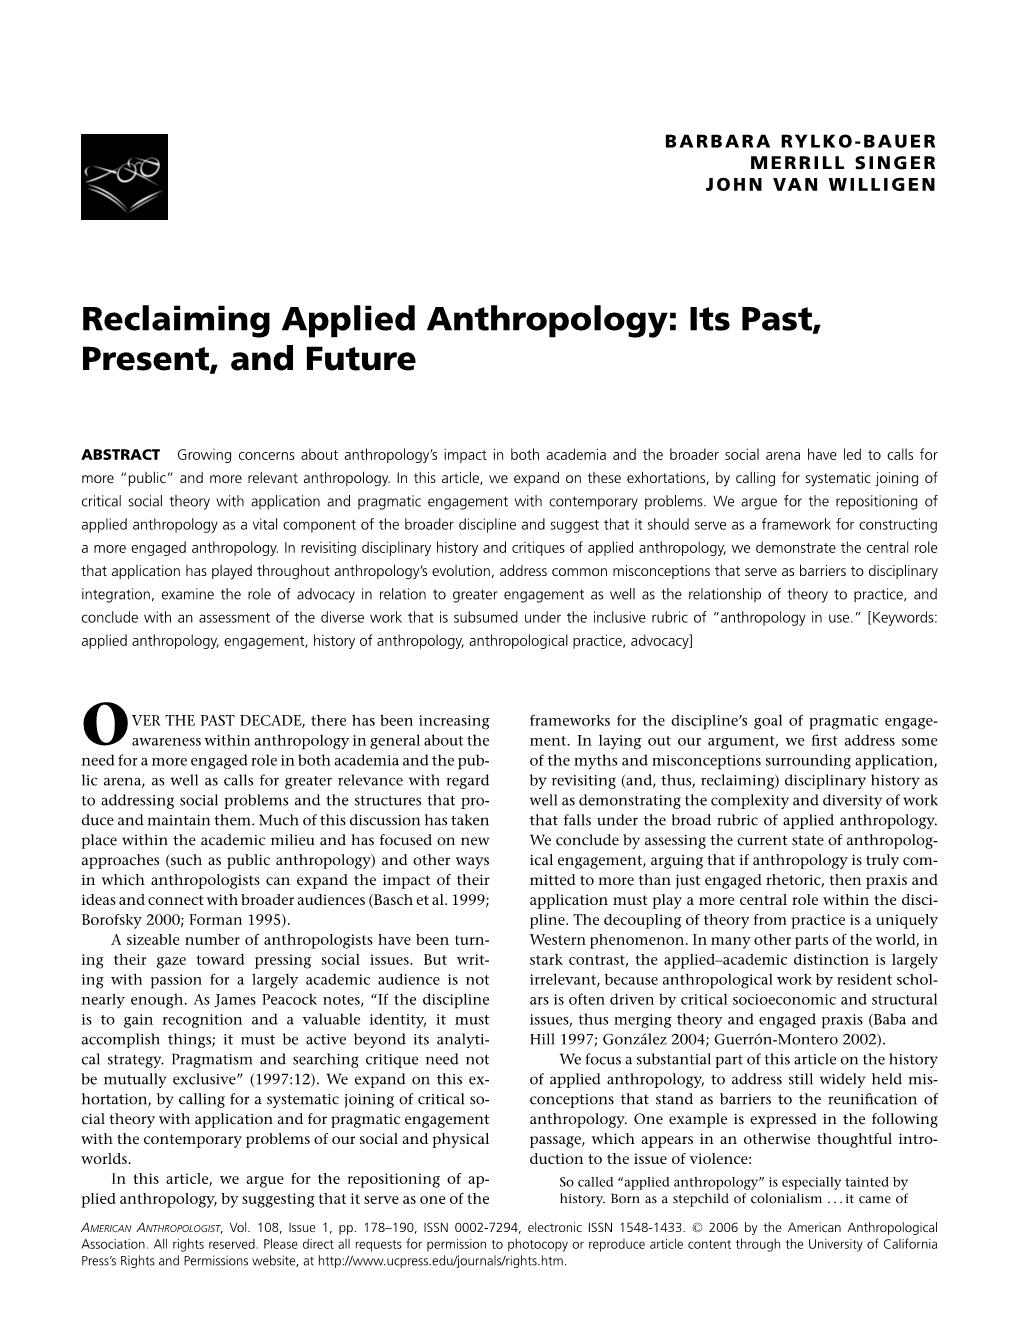 Reclaiming Applied Anthropology: Its Past, Present, and Future